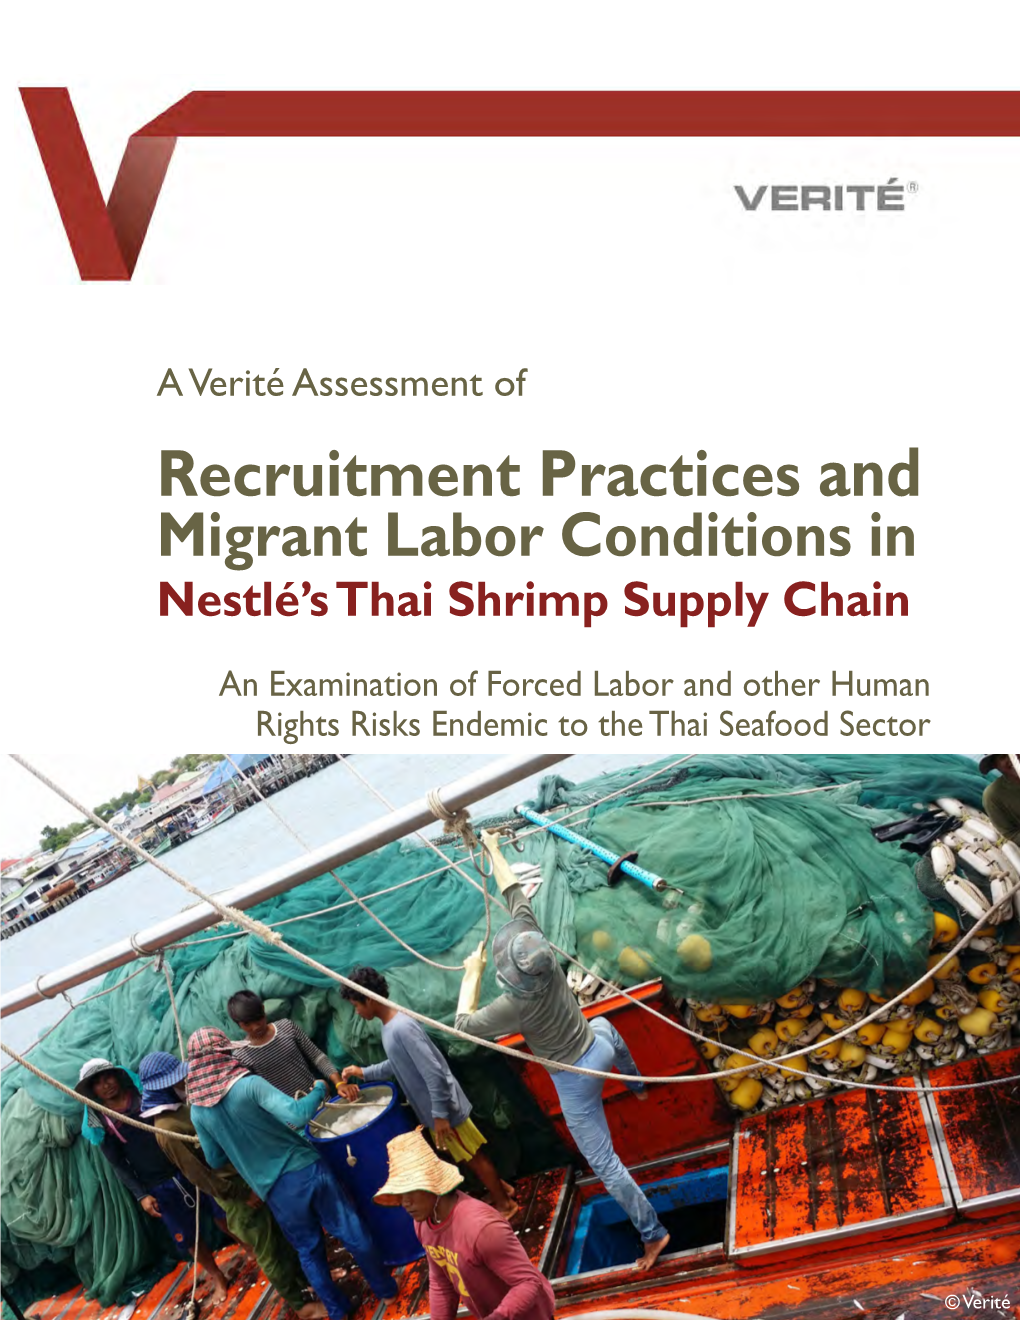 Recruitment Practices and Migrant Labor Conditions in Nestlé's